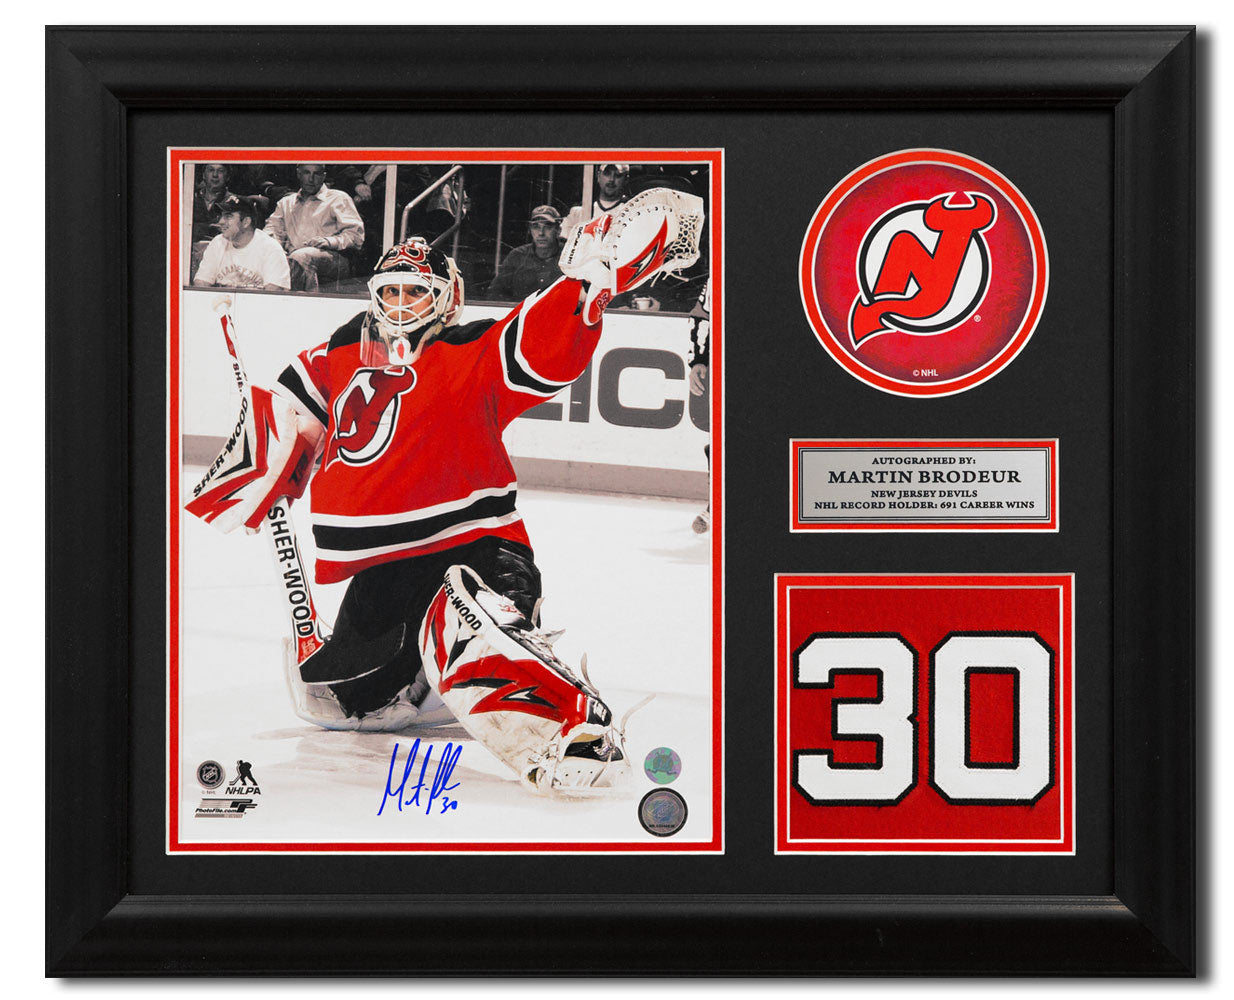 new jersey devils sign